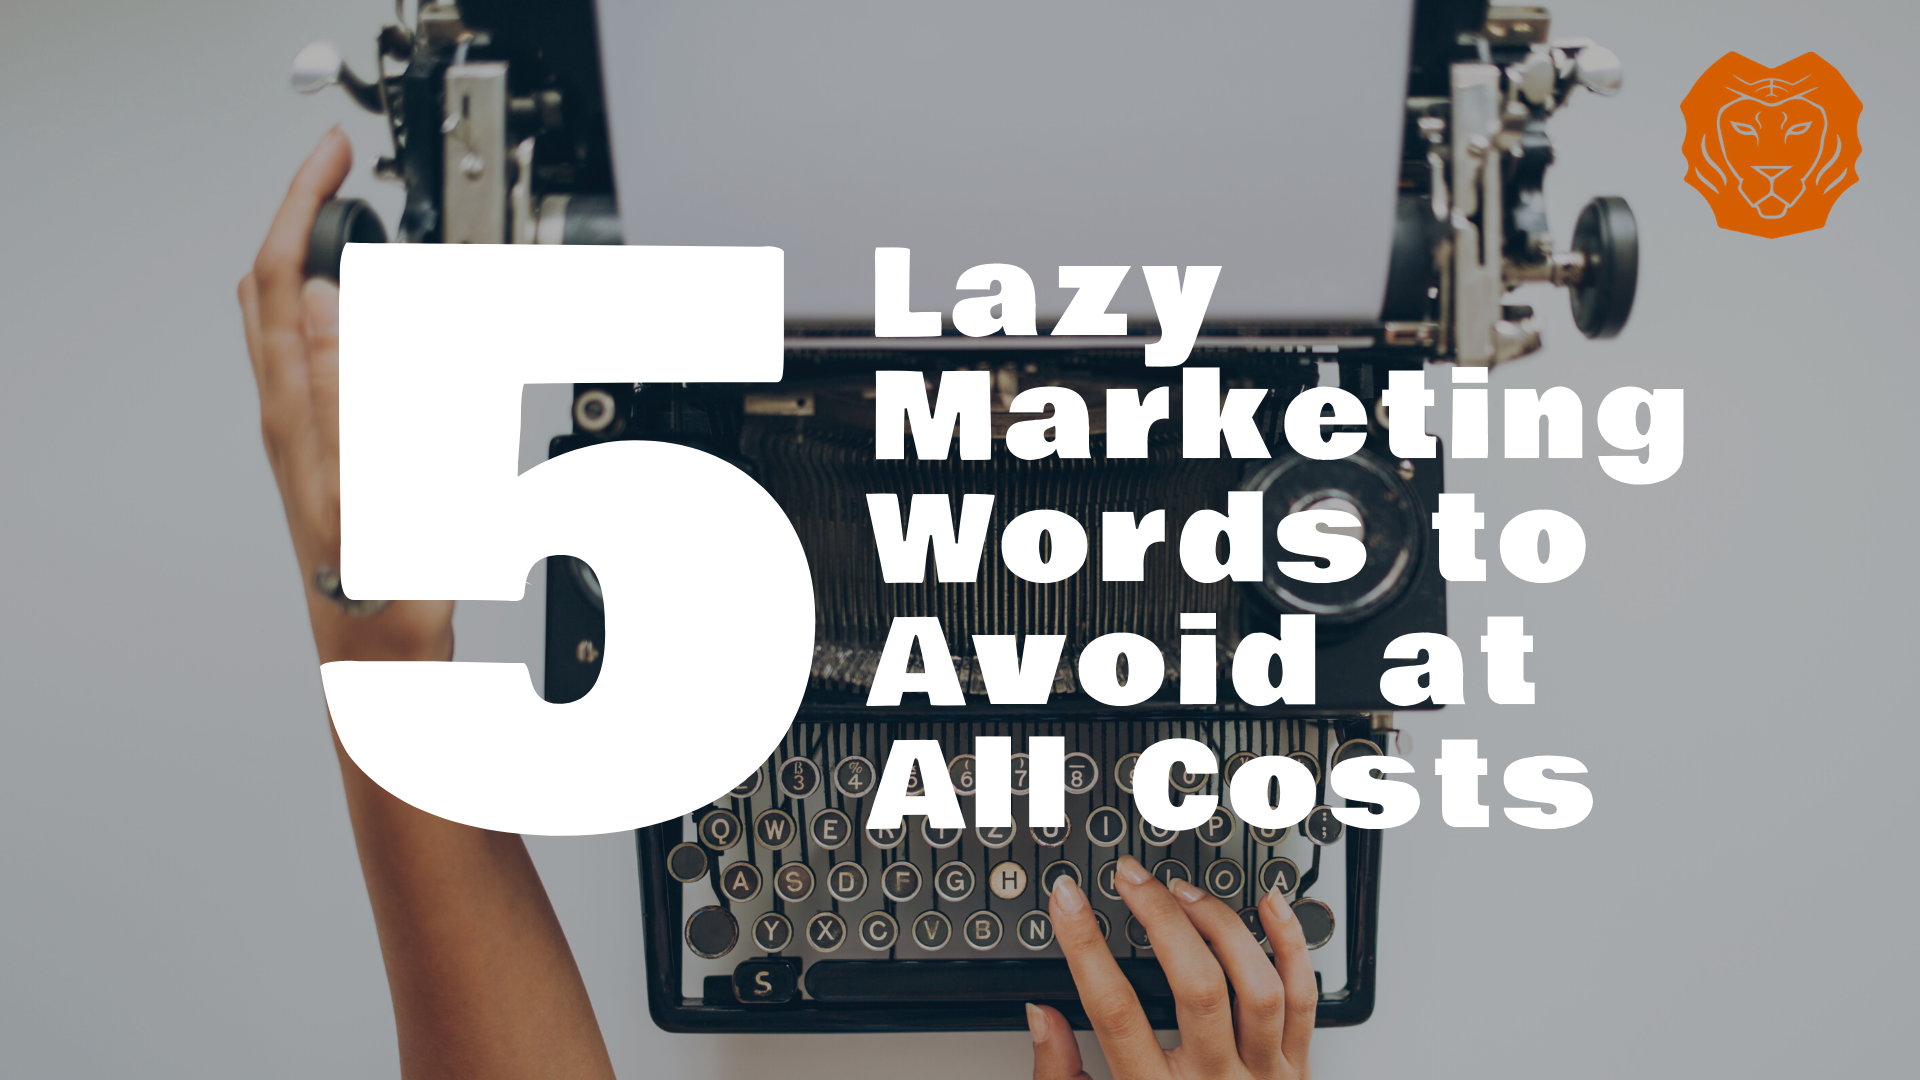 5 Lazy Marketing Words to Avoid at all Costs